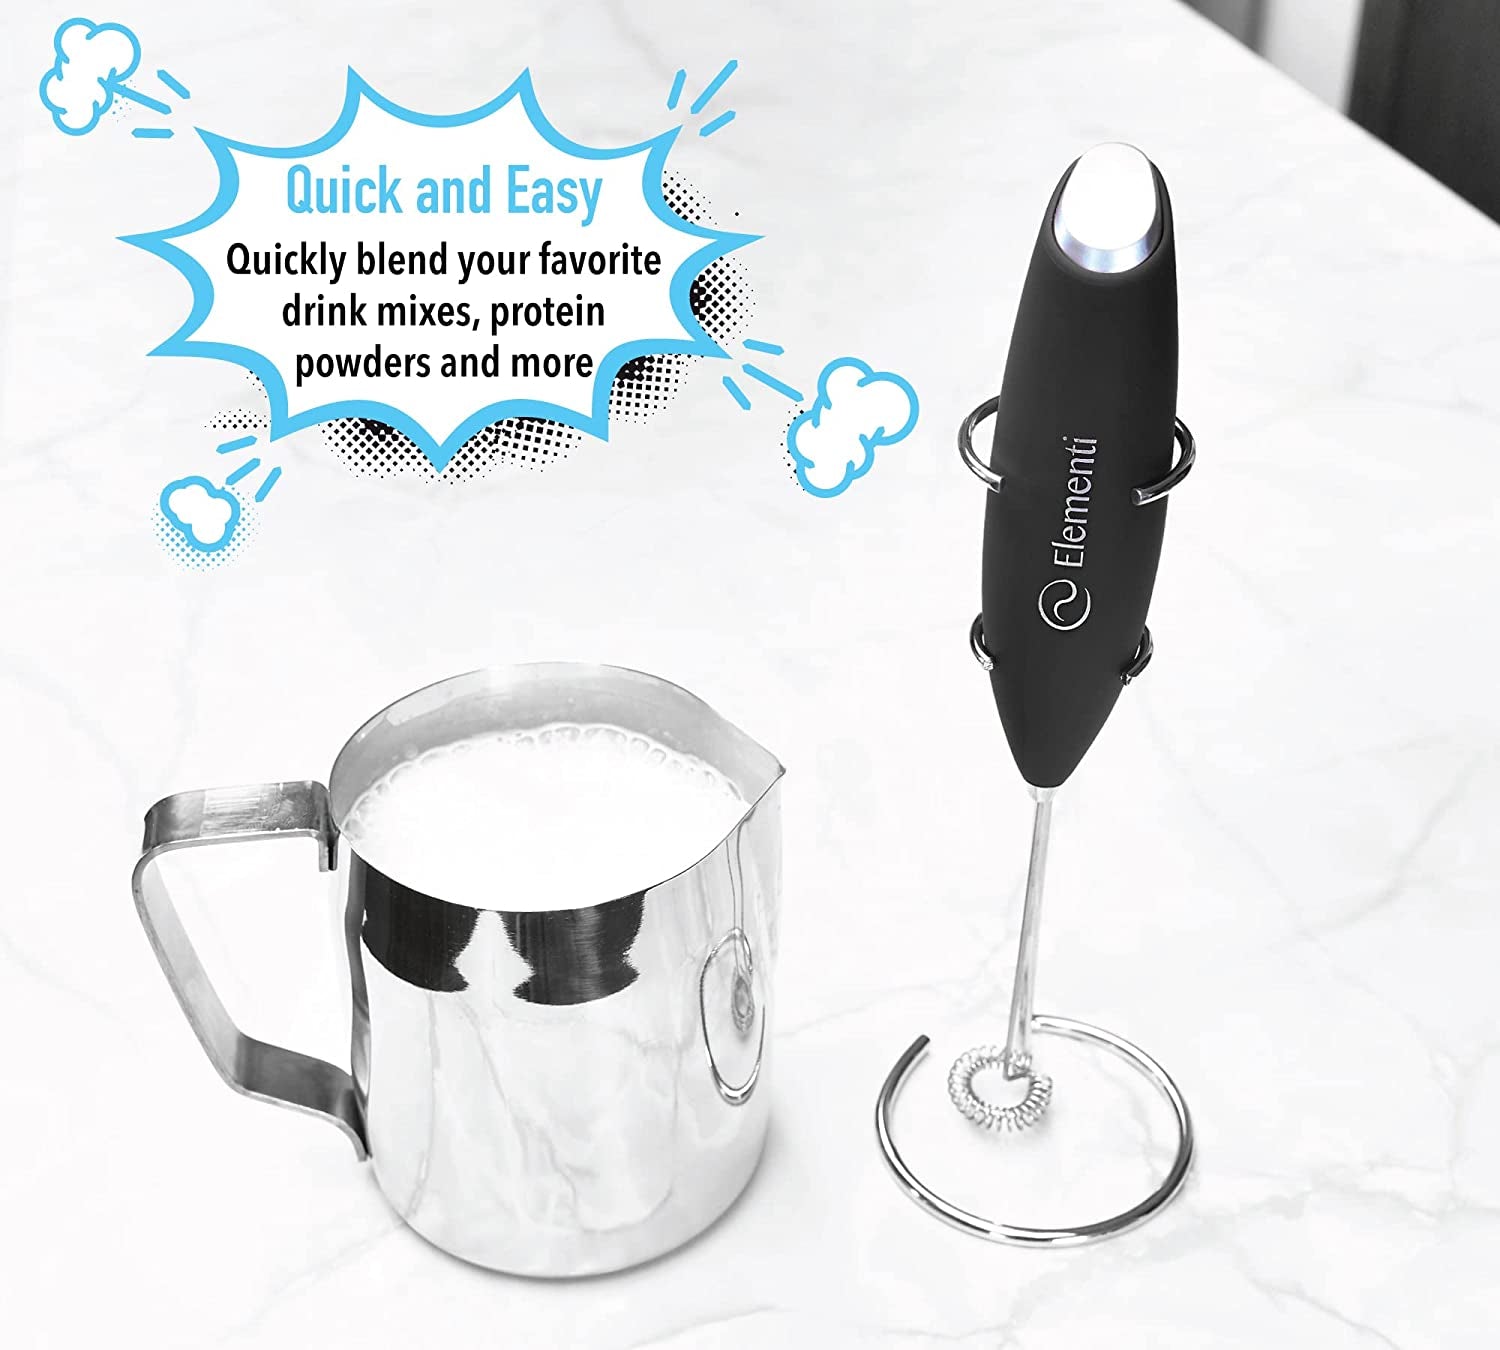 Milk Frother Wand & Matcha Mixer, Mini Electric Whisk for Coffee - Frother for Coffee - Milk Frother Handheld - Coffee Stirrers Electric Matcha Frother & Hand Whisk (Black)